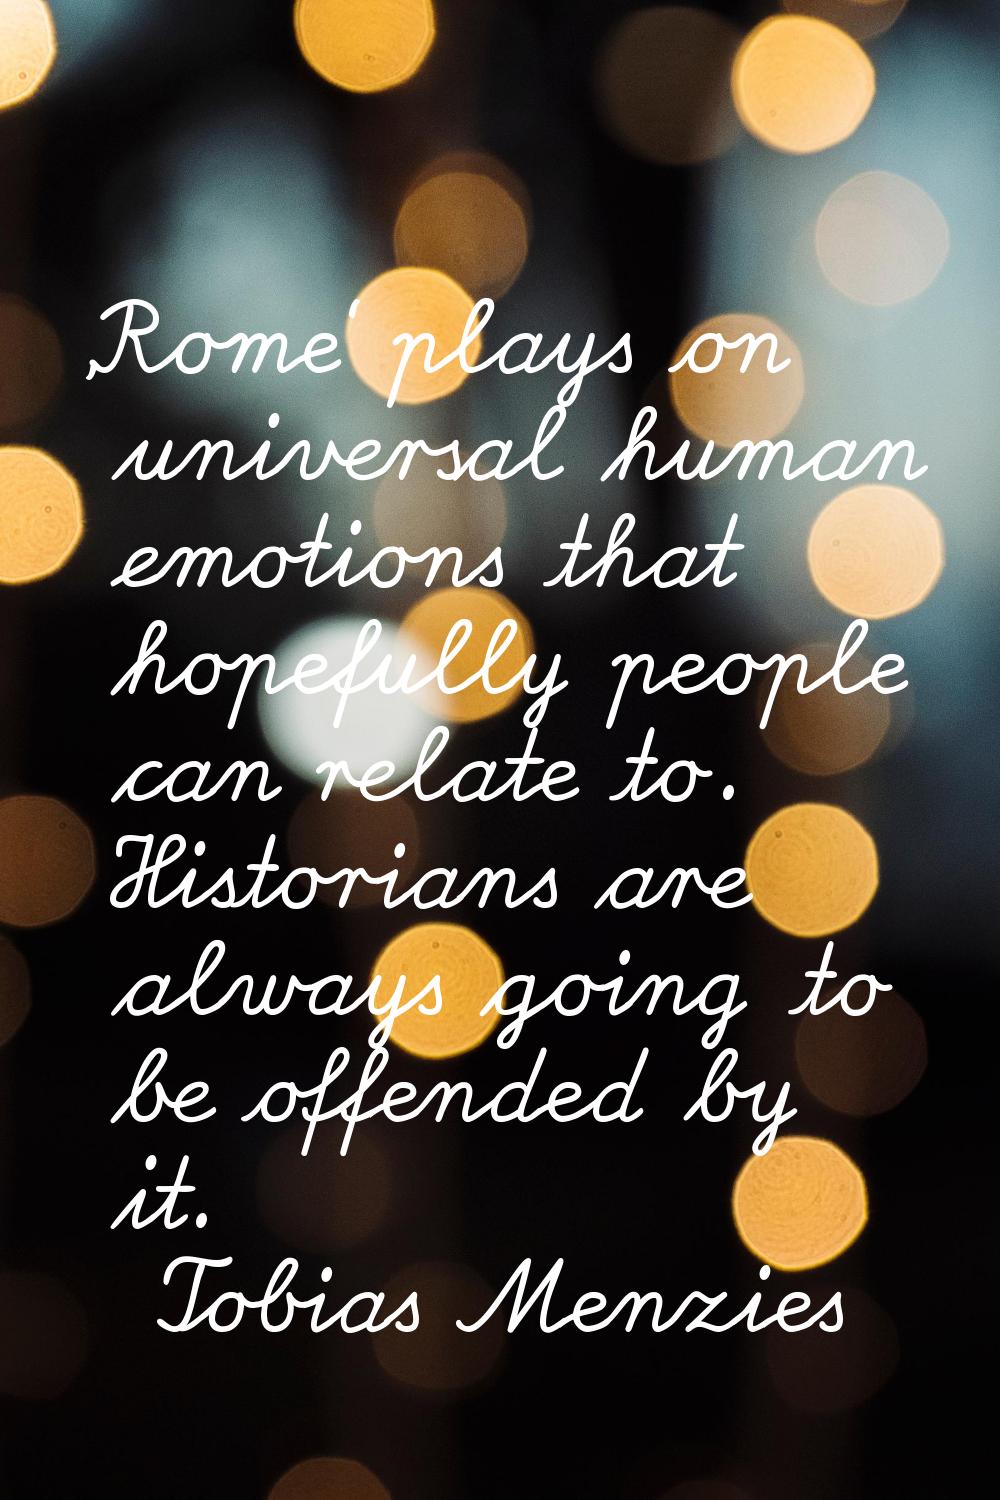 'Rome' plays on universal human emotions that hopefully people can relate to. Historians are always